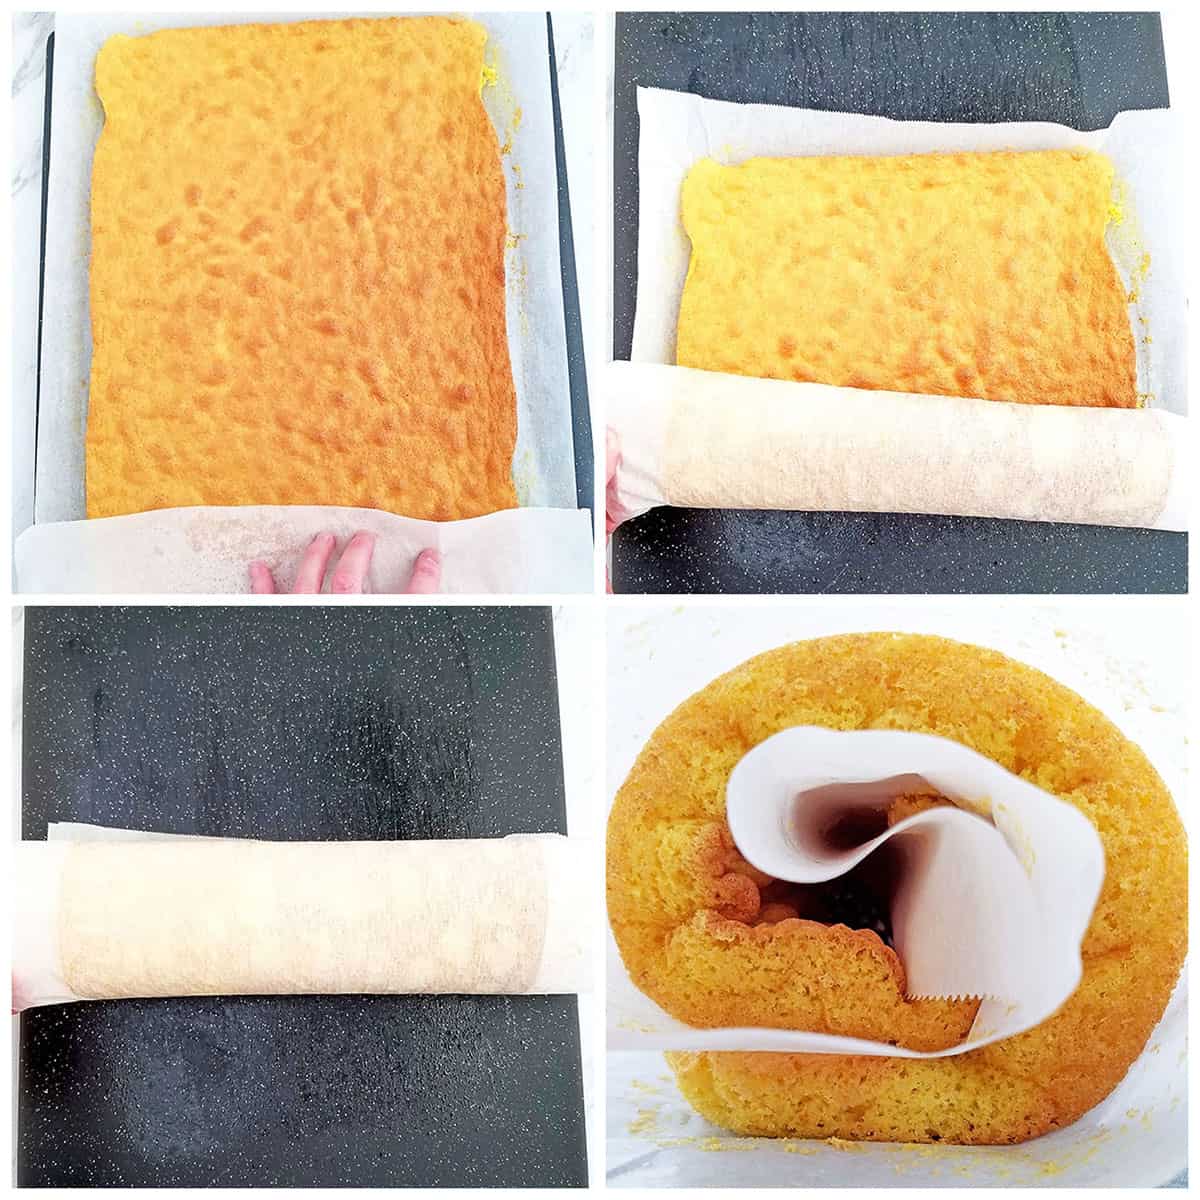 Roll the cake sponge roll into a loose log by using the parchment paper and let it cool completely before frosting. When the cake is still warm and we roll it, it helps it retain its shape better later and will also ensure that it doesn’t crack.